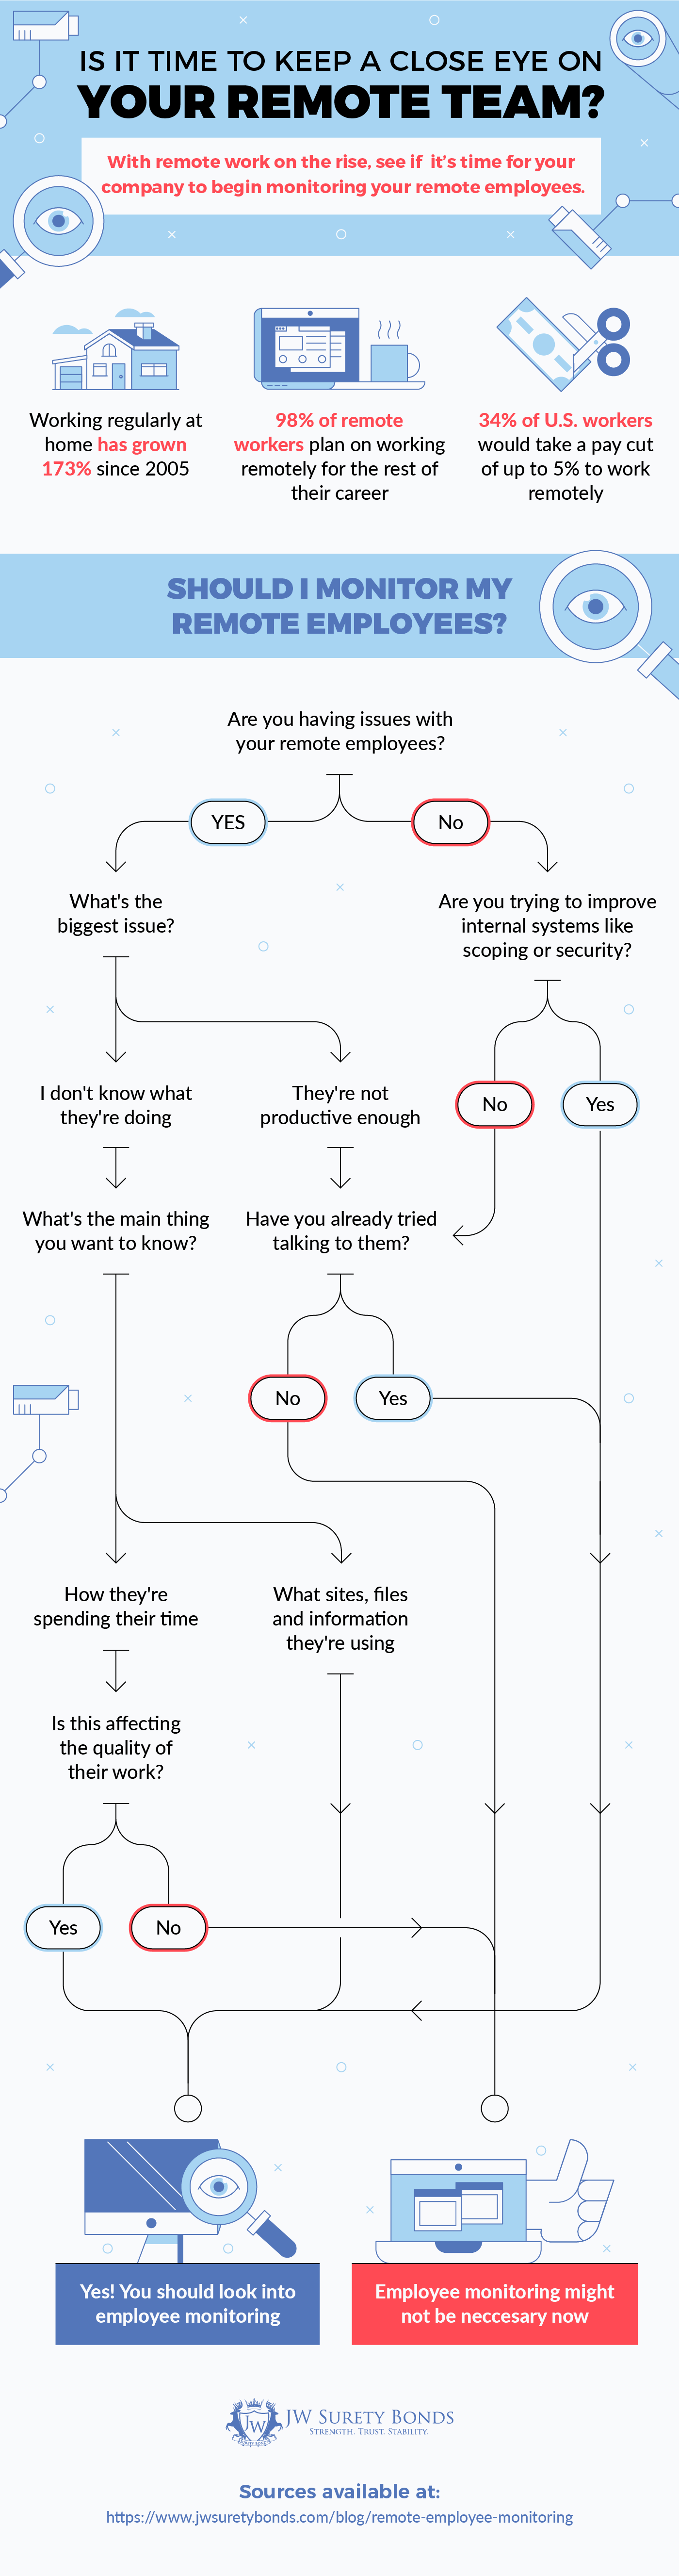 should you monitor remote employees flowchart